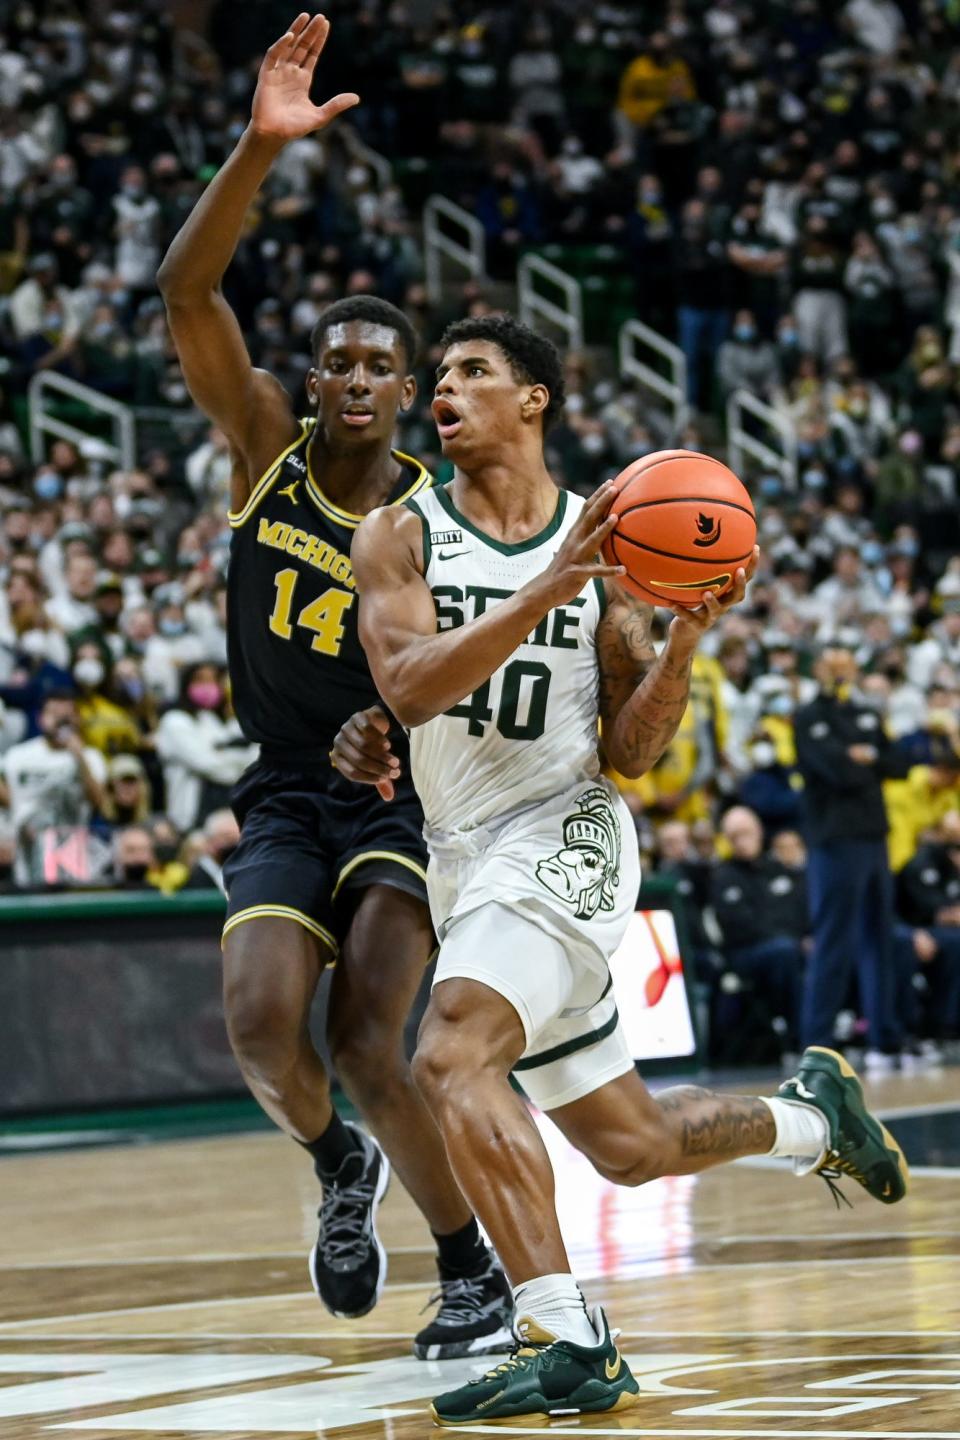 Keon Coleman will likely be hoping to carve out a role on MSU's basketball team when he joins the squad after football season.